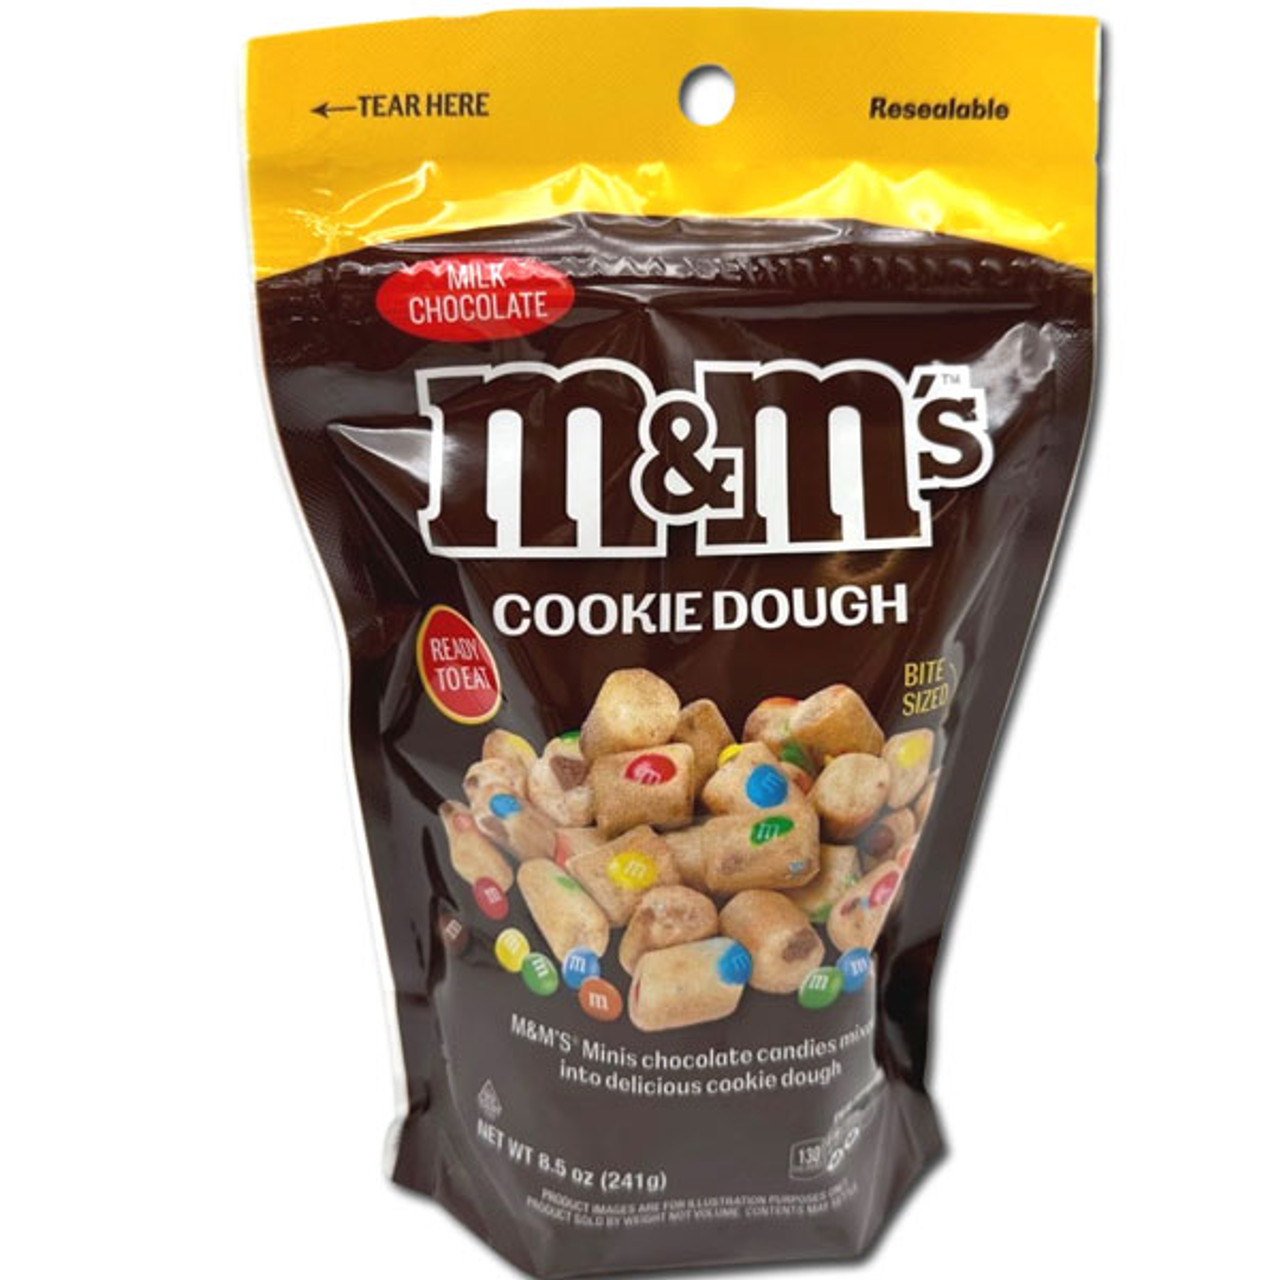  M&M's Crispy Chocolate Candy 1.35-Ounce Pouch 24